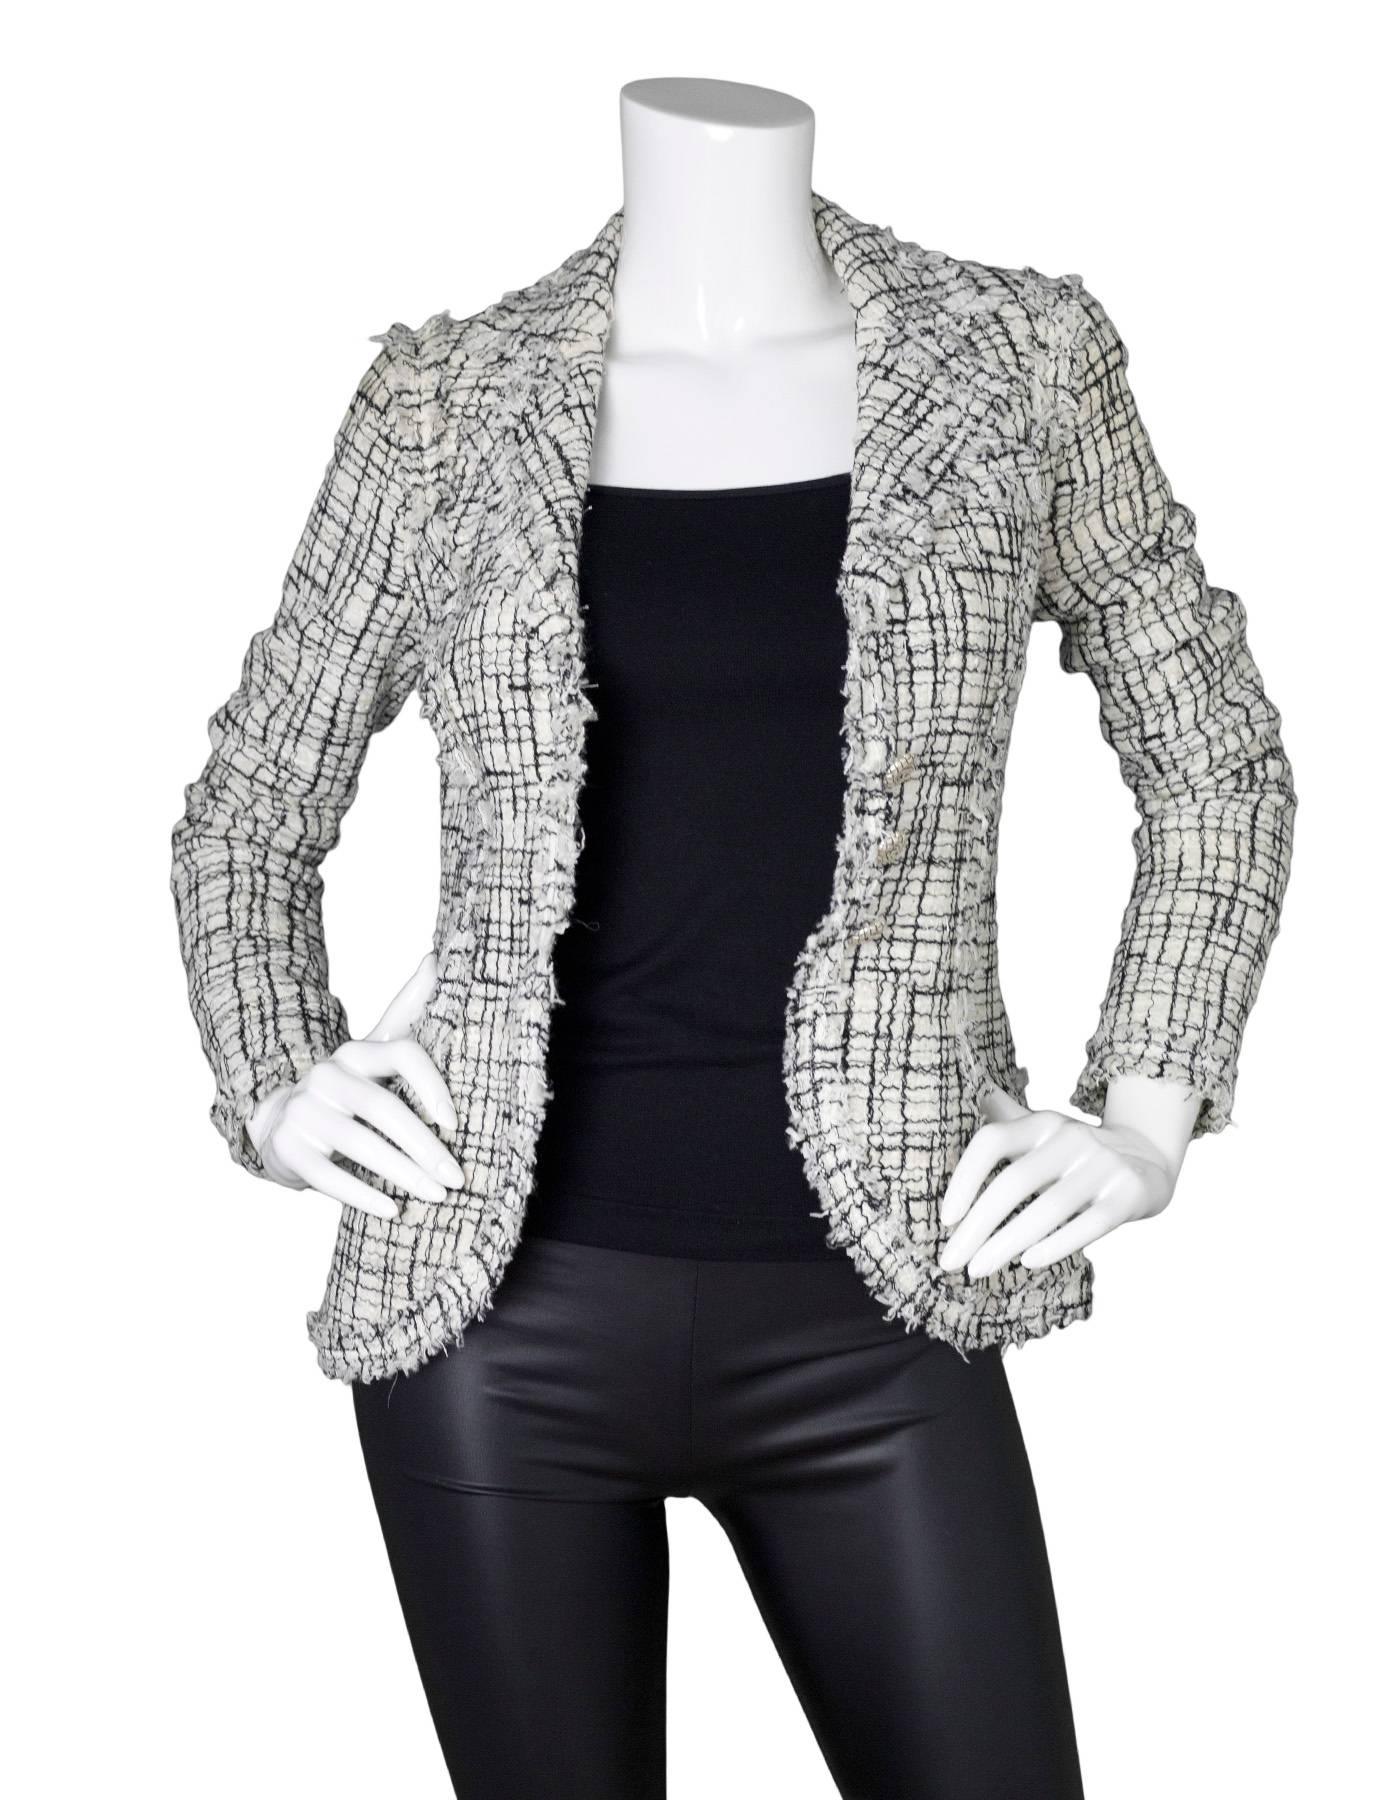 Chanel Black & White Tweed Jacket

Made In: France
Year of Production: 2006
Color: Black and white
Composition: 53% cotton, 12% polyethylene, 12% rayon, 10% acetate, 5% nylon, 5% silk, 3% wooll
Lining: White, 96% silk, 4%